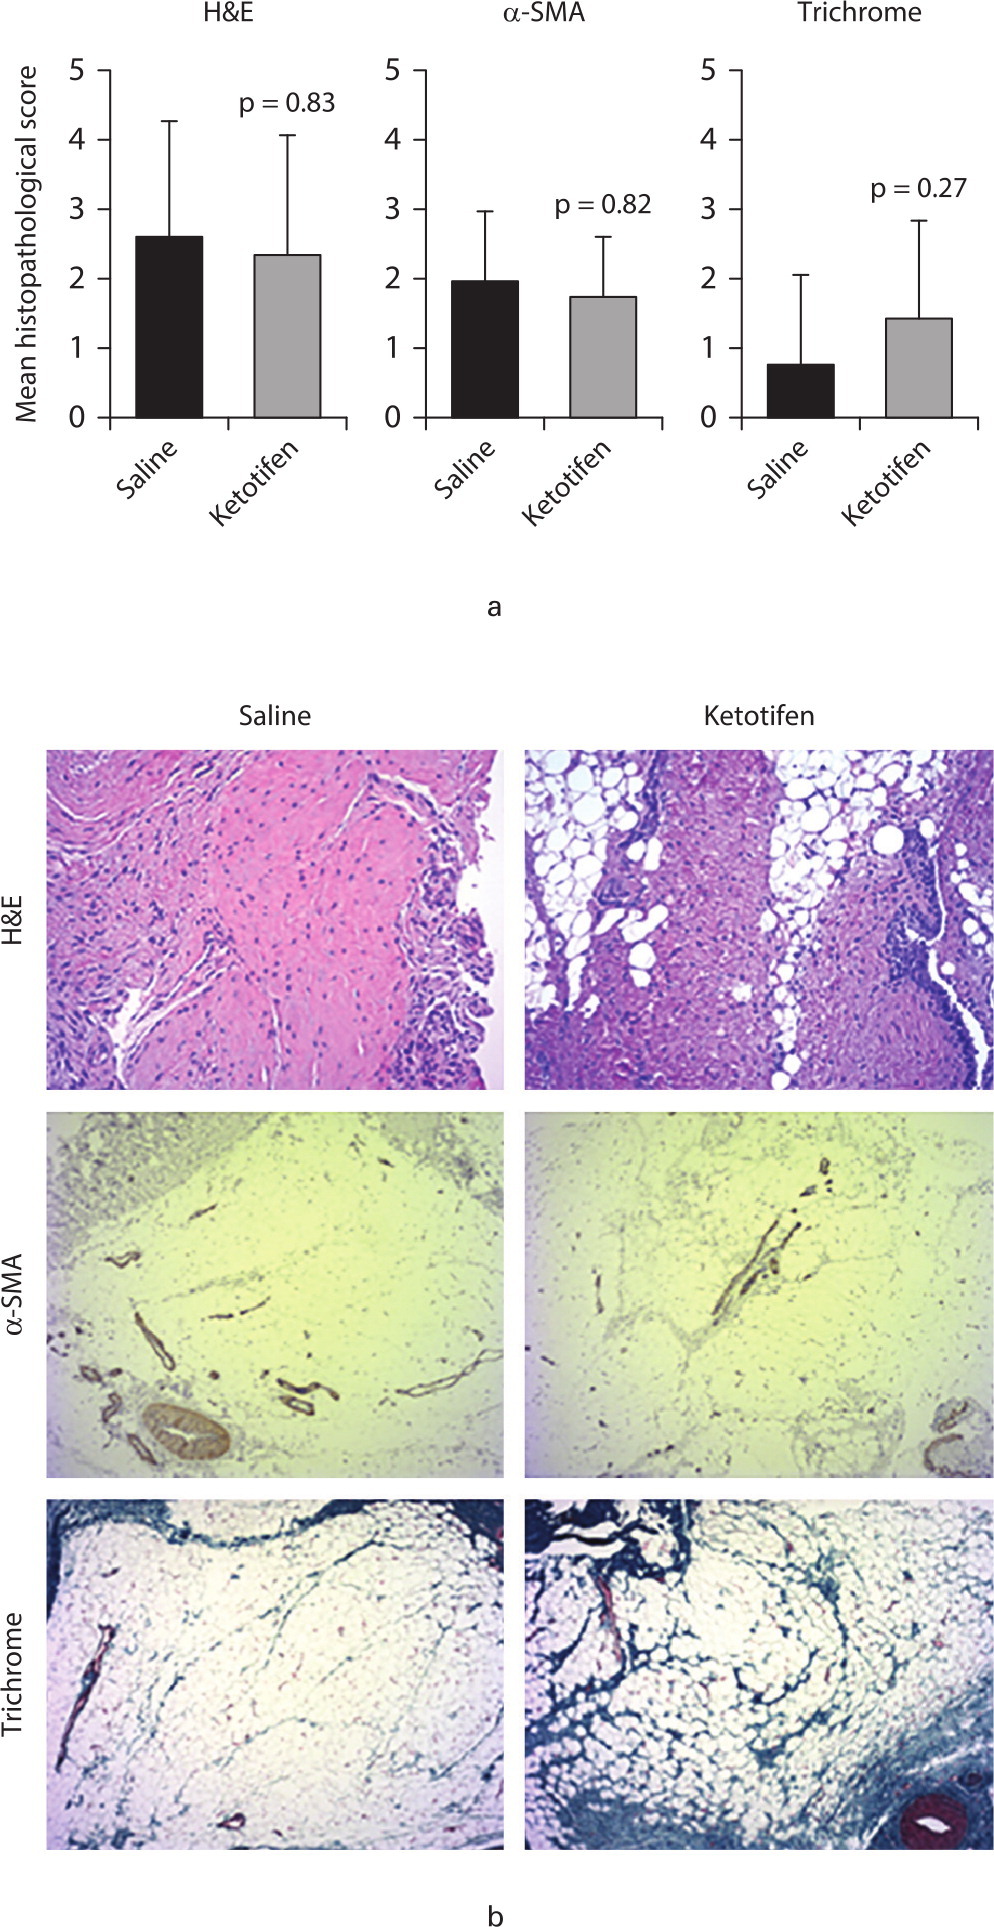 Fig. 4 
            Histopathological data showing no difference in fibrous lesions in periarticular soft tissue as assessed in haematoxylin and eosin (H&E)-stained, α-smooth muscle actin (α-SMA; myofibroblast marker)-labelled, and Masson’s trichrome-stained sections, in the rabbits that received ketotifen compared to the rabbits that received saline. This is represented by a) bar graphs depicting the mean histopathological score and b) representative images of the H&E-stained, α-SMA-labelled, and Masson’s trichrome-stained sections. Statistical significance was assessed using the Mann-Whitney U test.
          